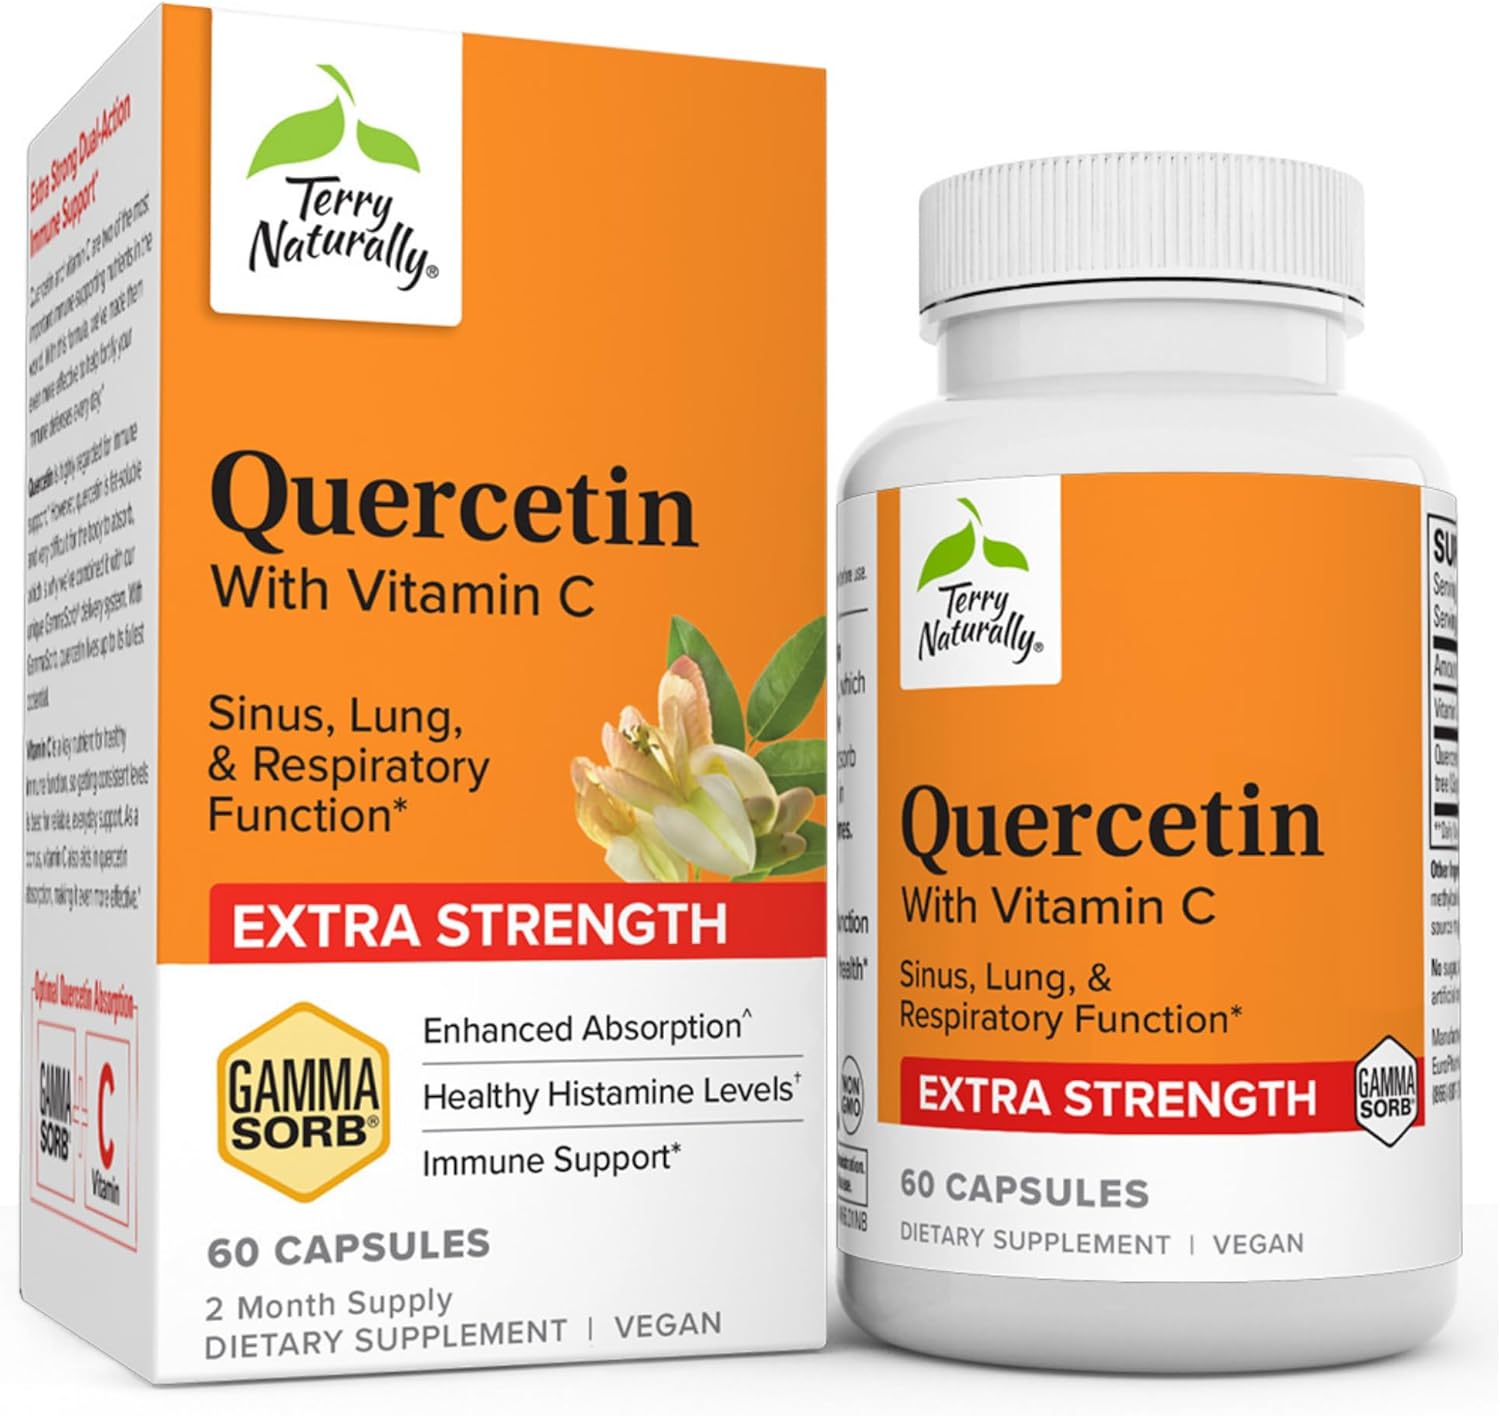 Terry Naturally Quercetin with Vitamin C Extra Strength - 60 Capsules - Sinus, Lung & Respiratory Function - Non-GMO, Vegan - 60 Servings